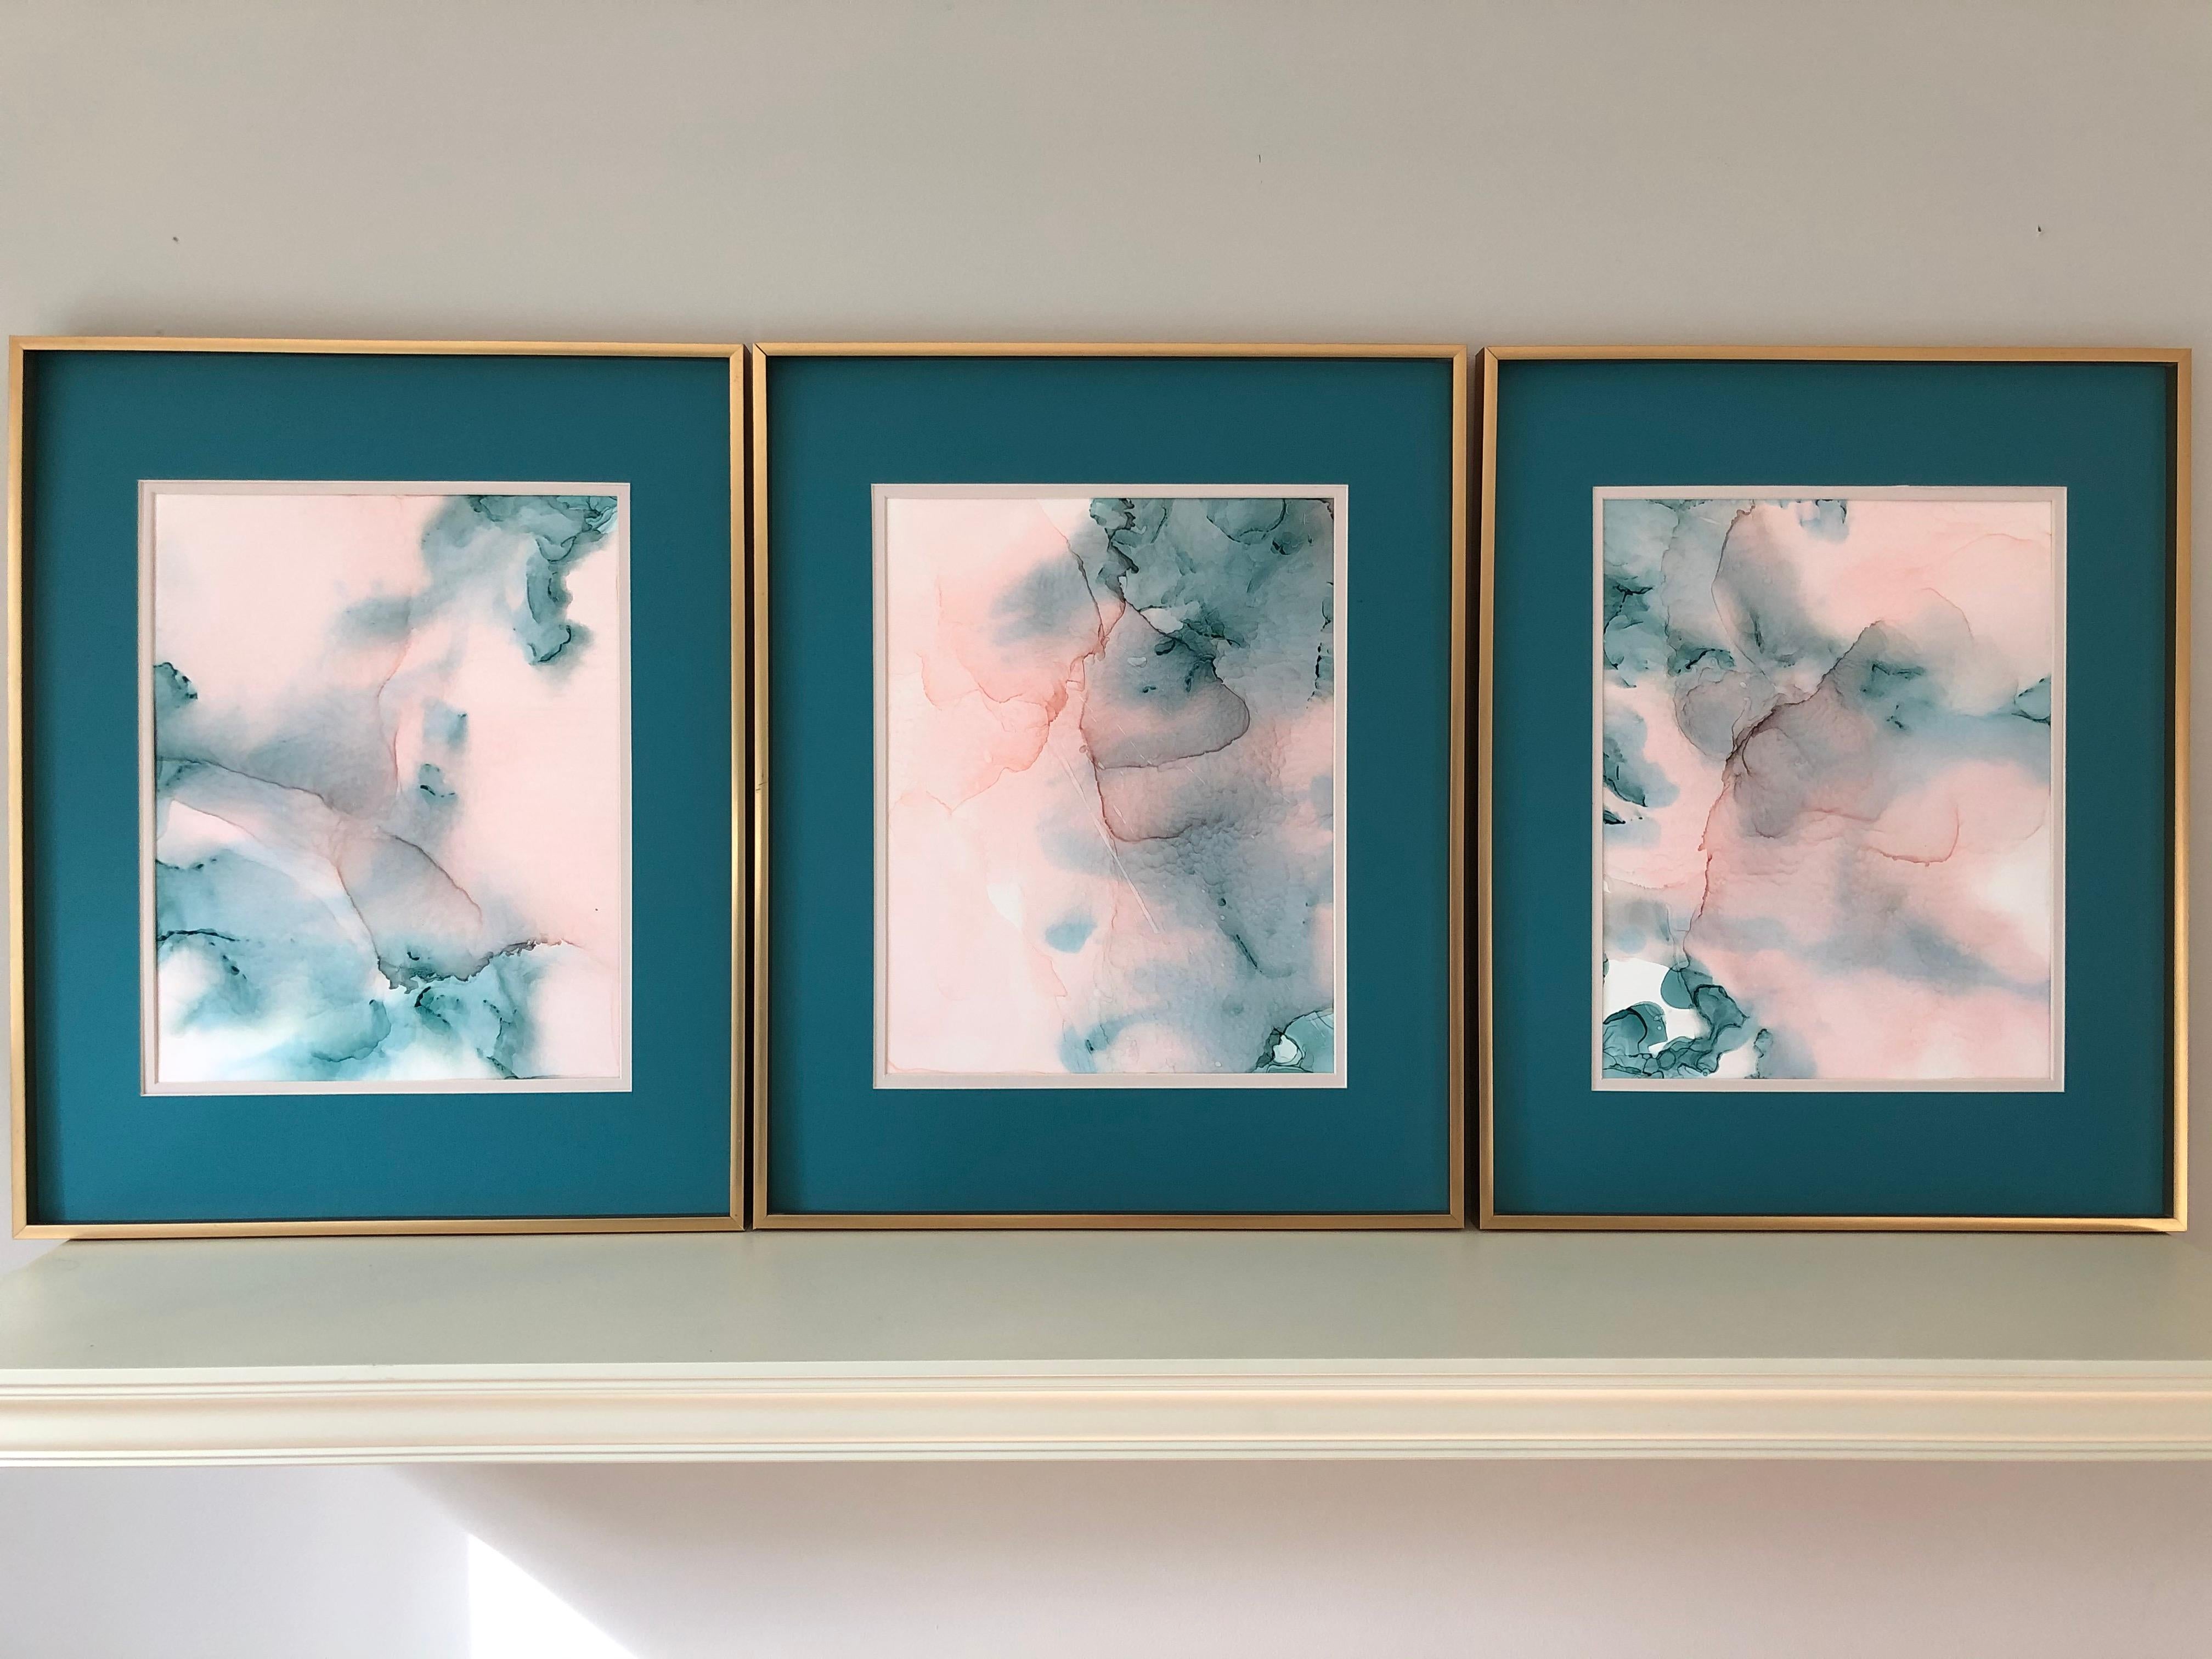 Cote D'Azur- abstraction art, made in pale pink, turquoise color - Art by Mila Akopova